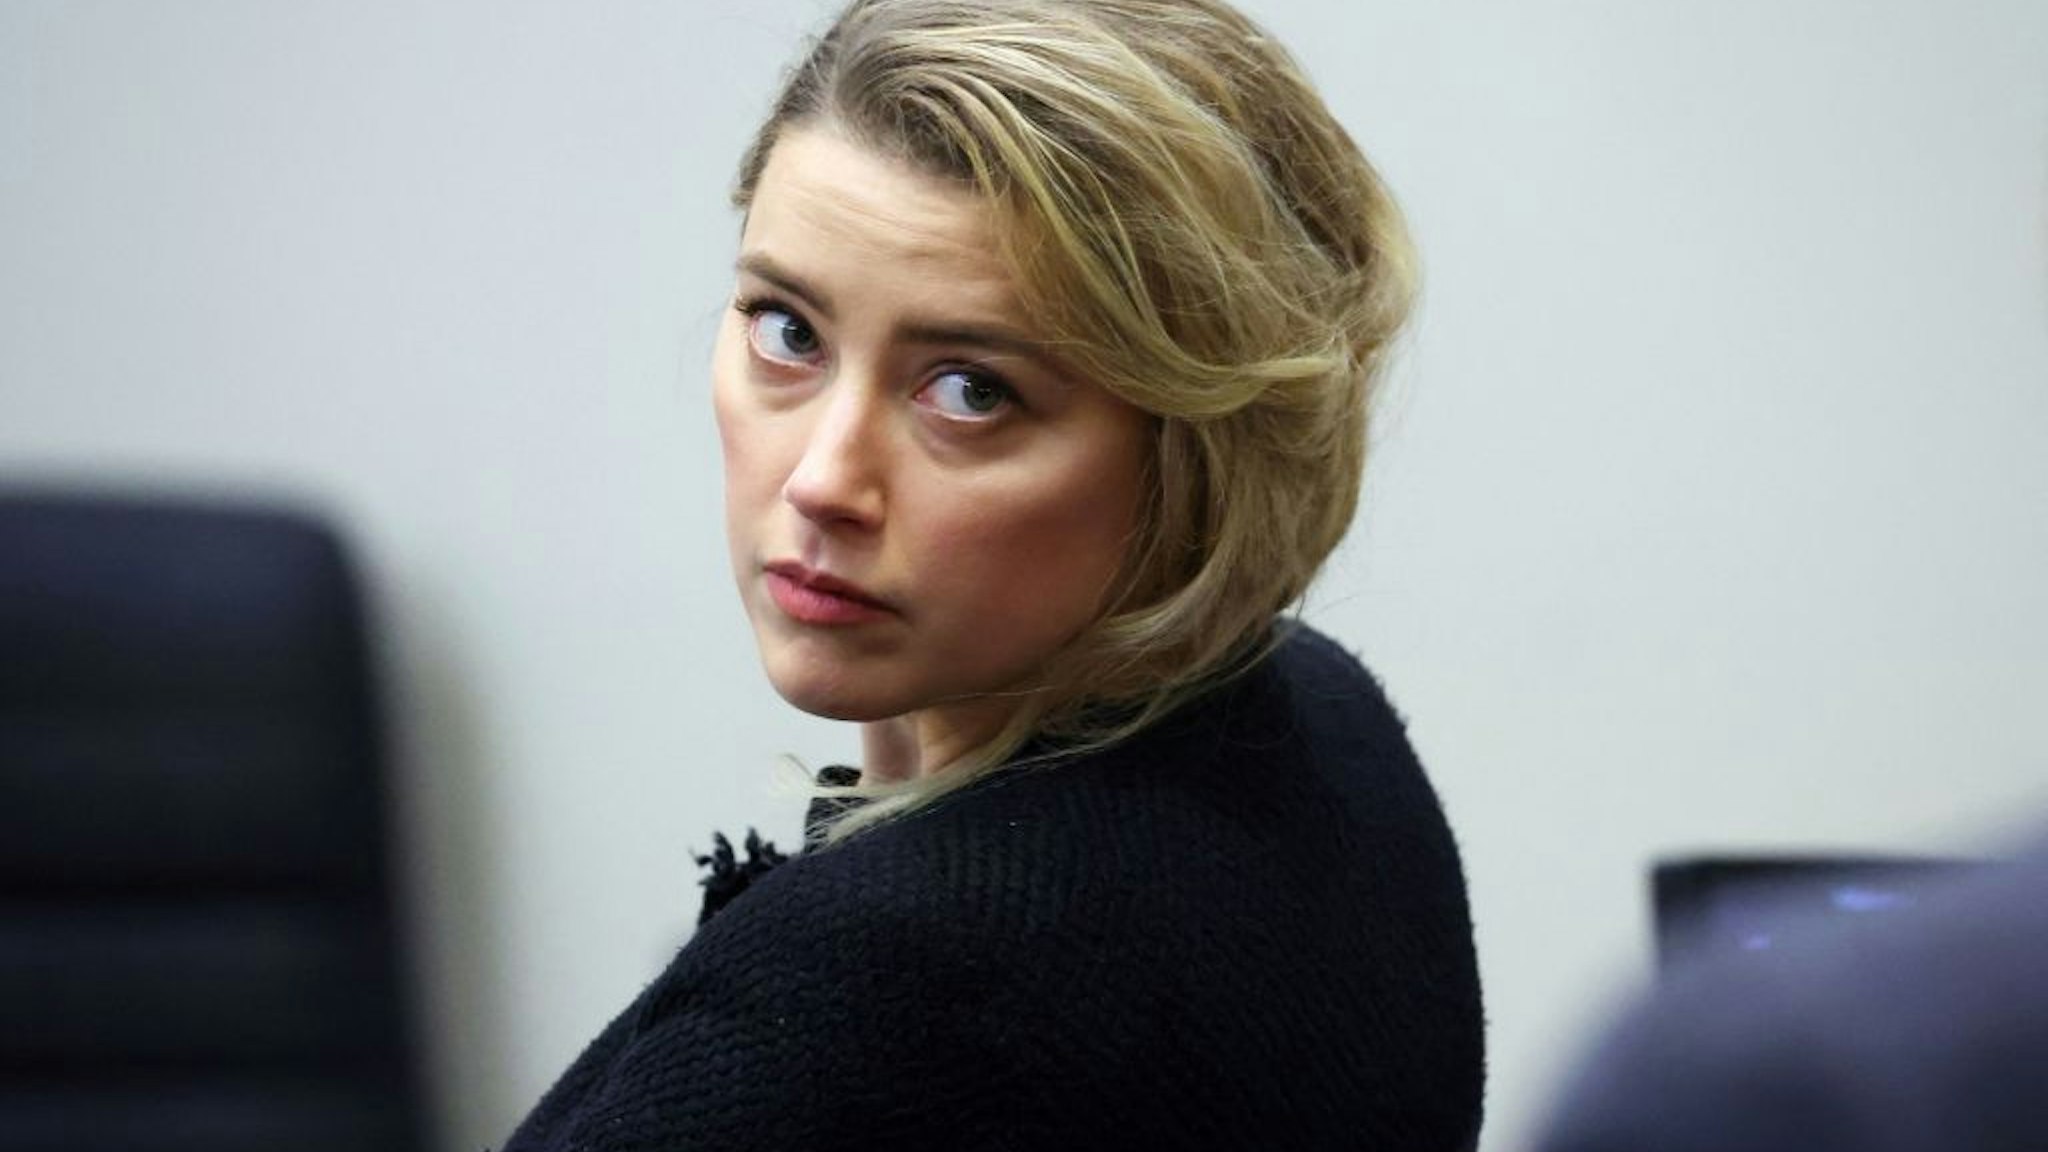 US actress Amber Heard during the 50 million US dollar Depp vs Heard defamation trial at the Fairfax County Circuit Court in Fairfax, Virginia, on April 28, 2022.